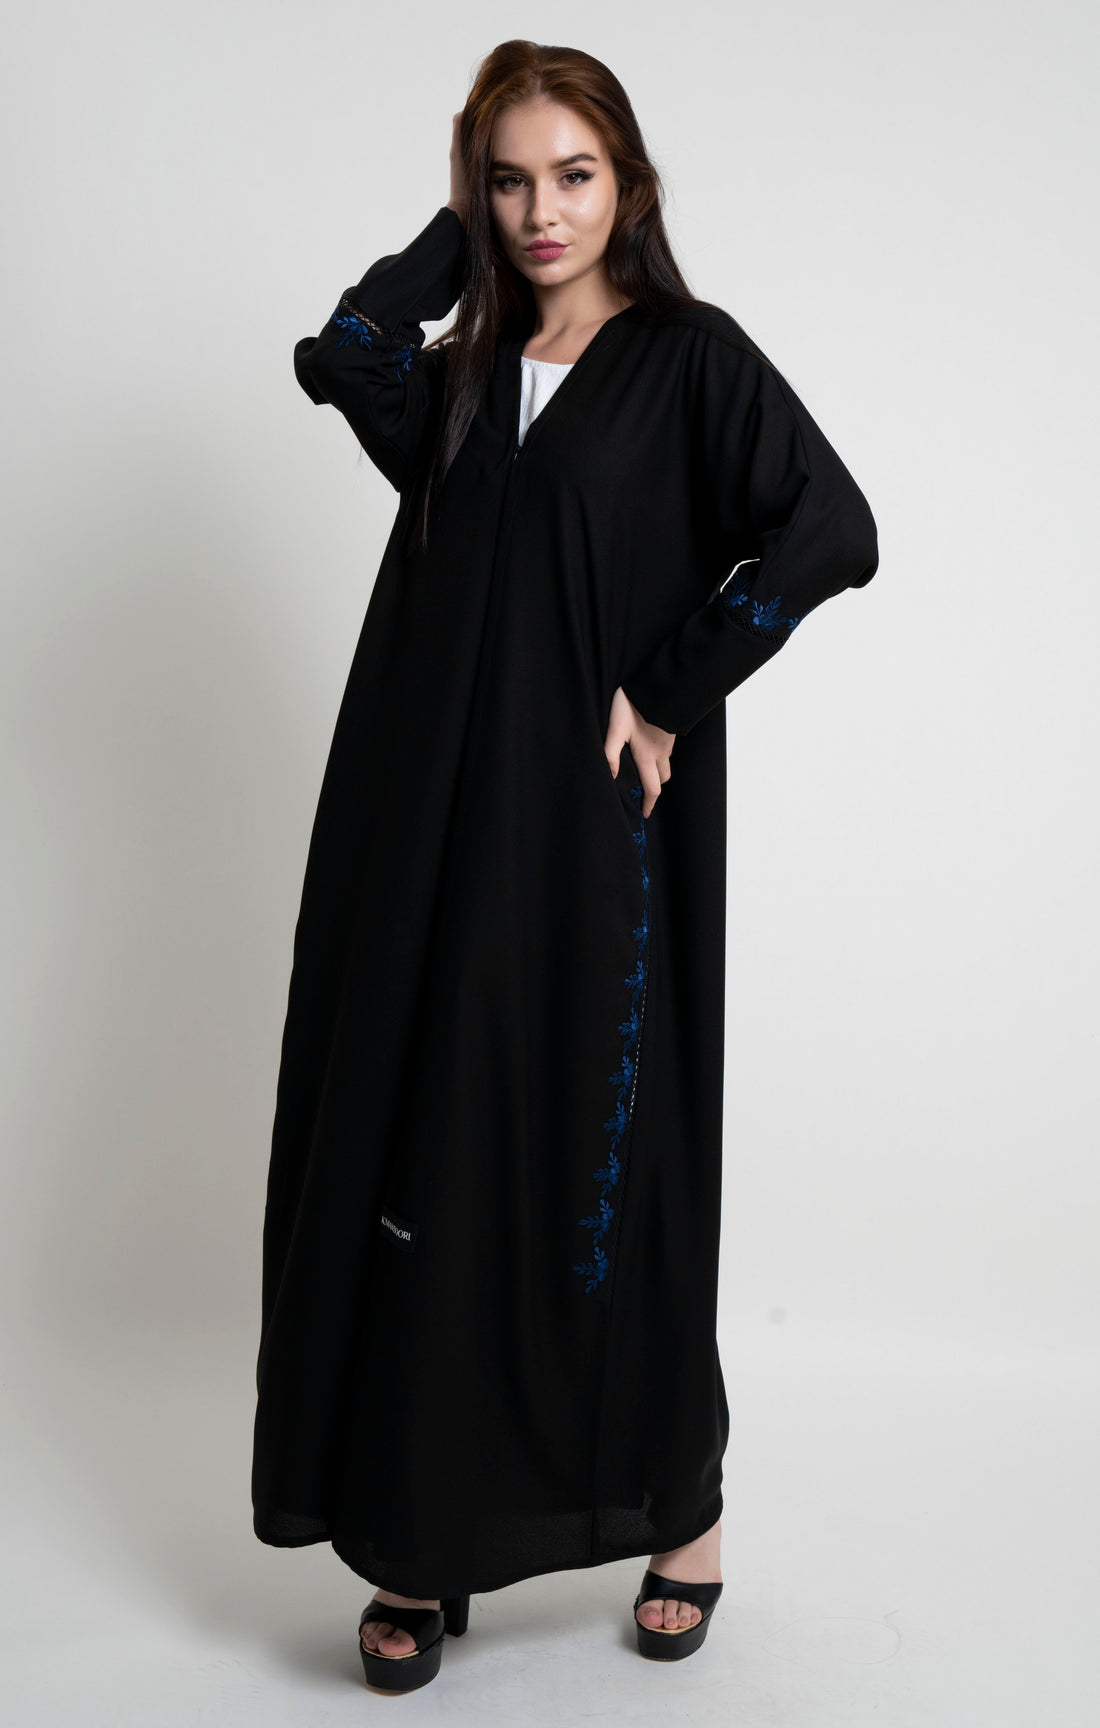 7-Day Style Guide to Elevate Your Abaya Fashion